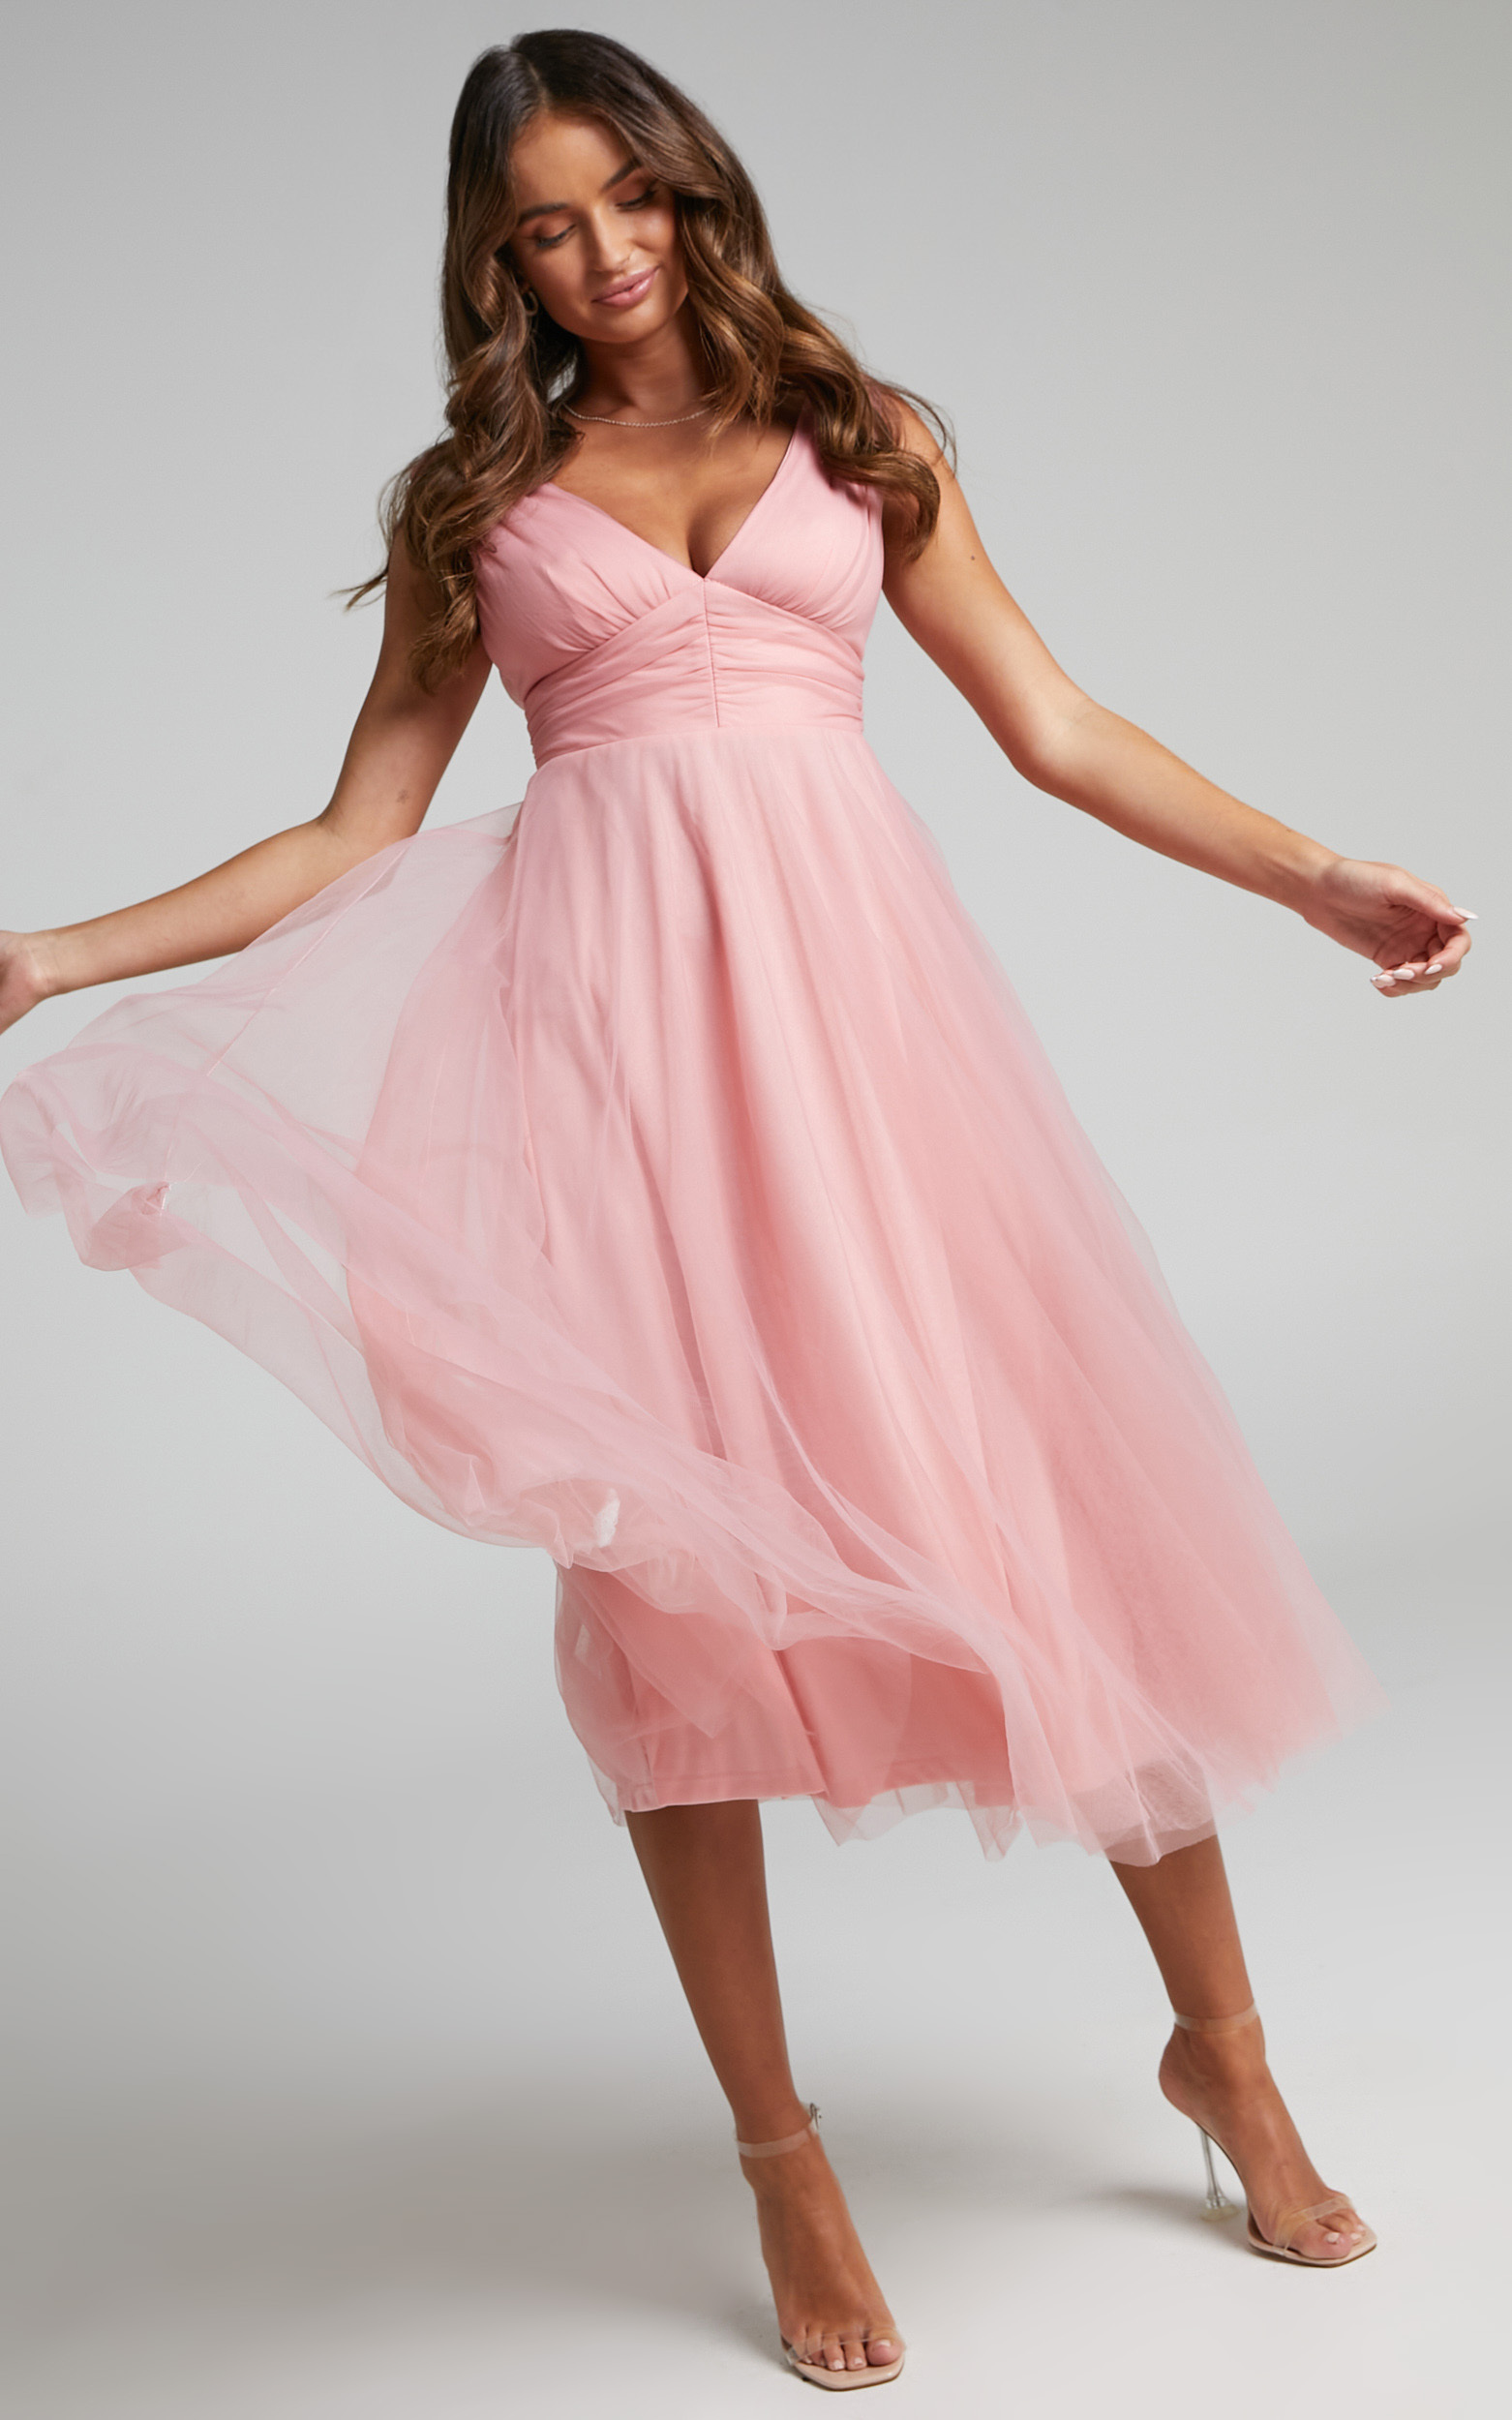 Agatha Sleeveless V-Neck Organza Midi Dress in Dusty Pink - 06, PNK1, hi-res image number null